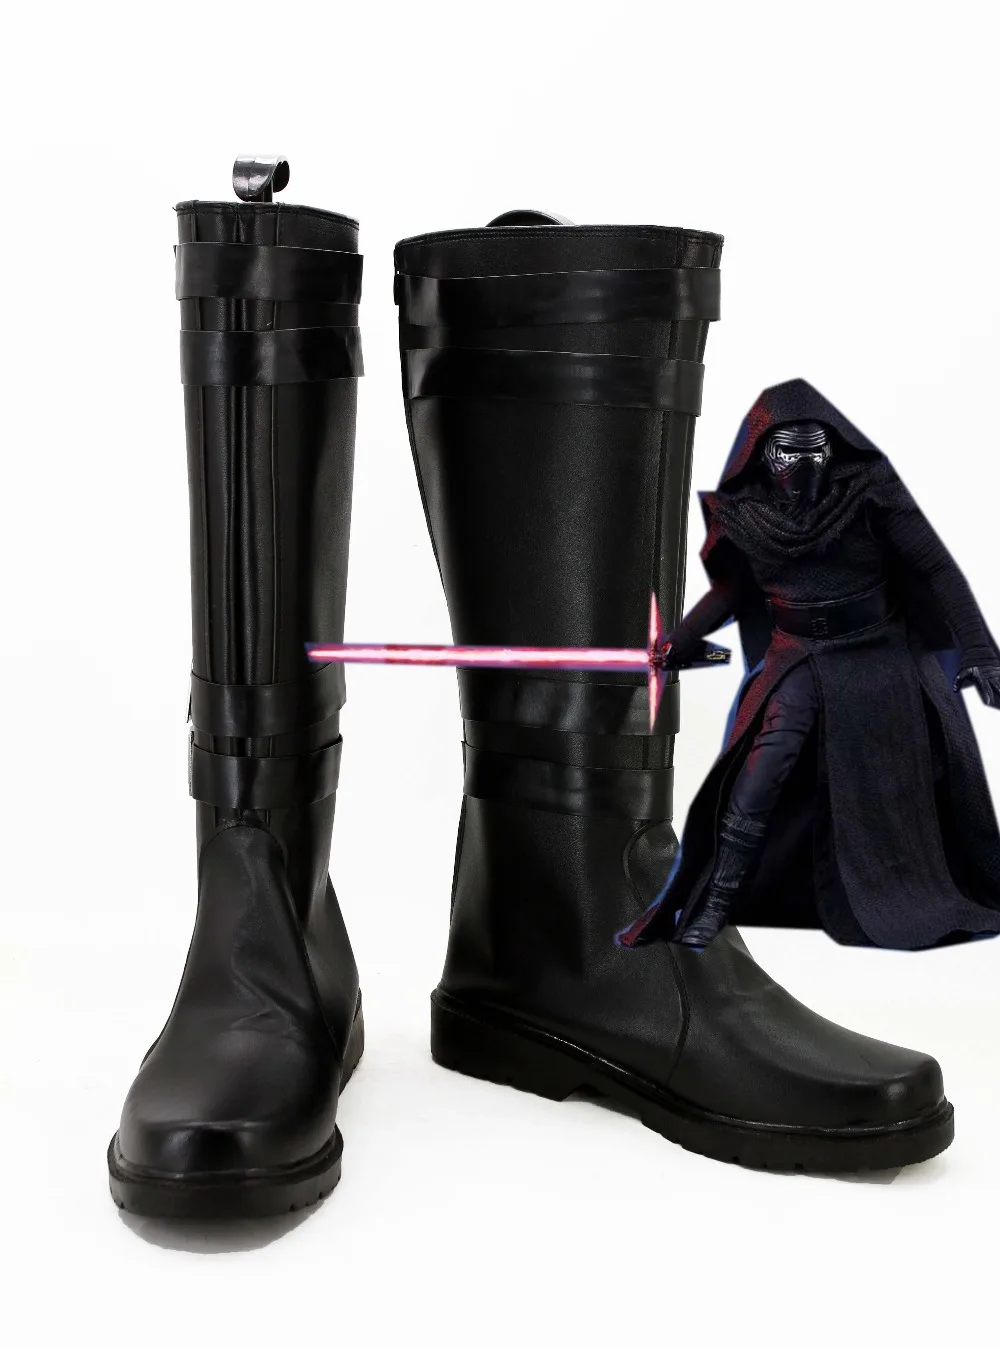 

Star Wars 7 cosplay shoes The Force Awakens Kylo Ren Boots Moive Jedi Men Euro Size Halloween costumes